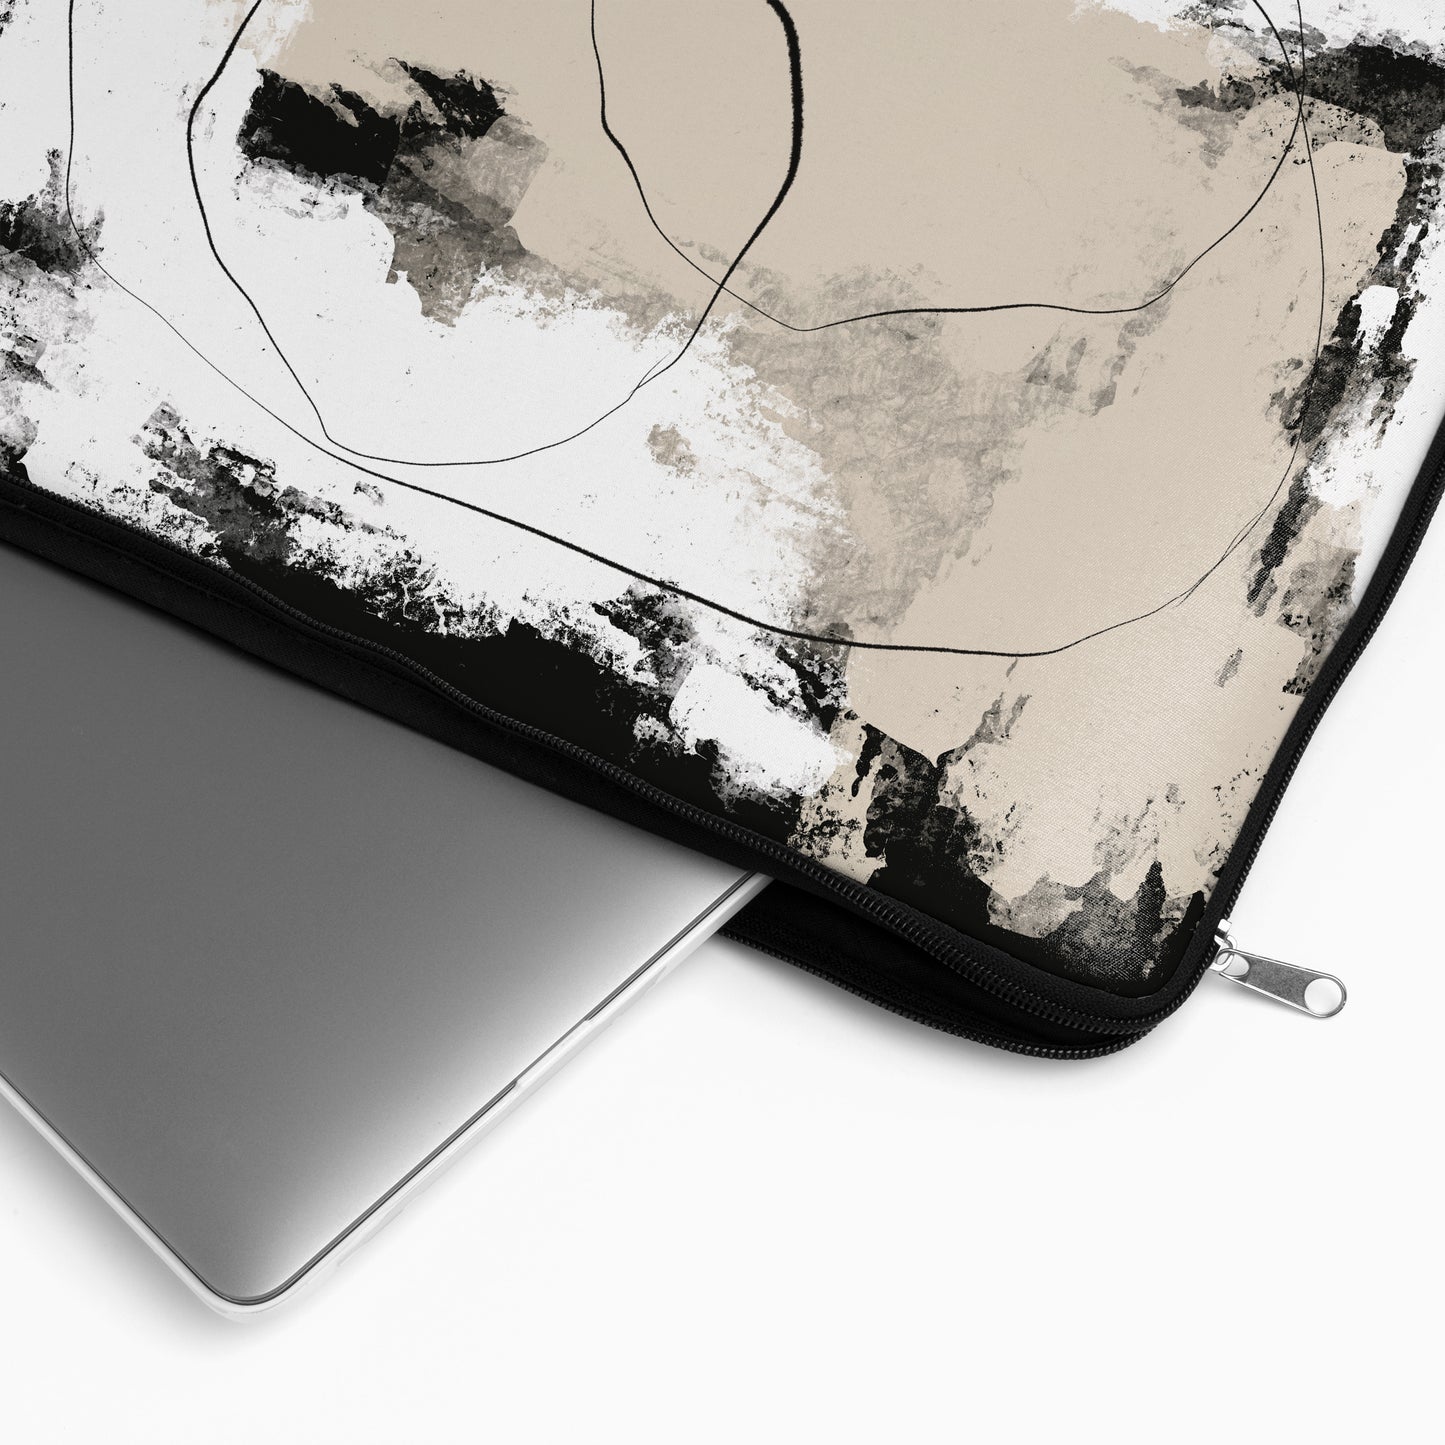 Abstract Modern Bright Paint - Laptop Sleeve